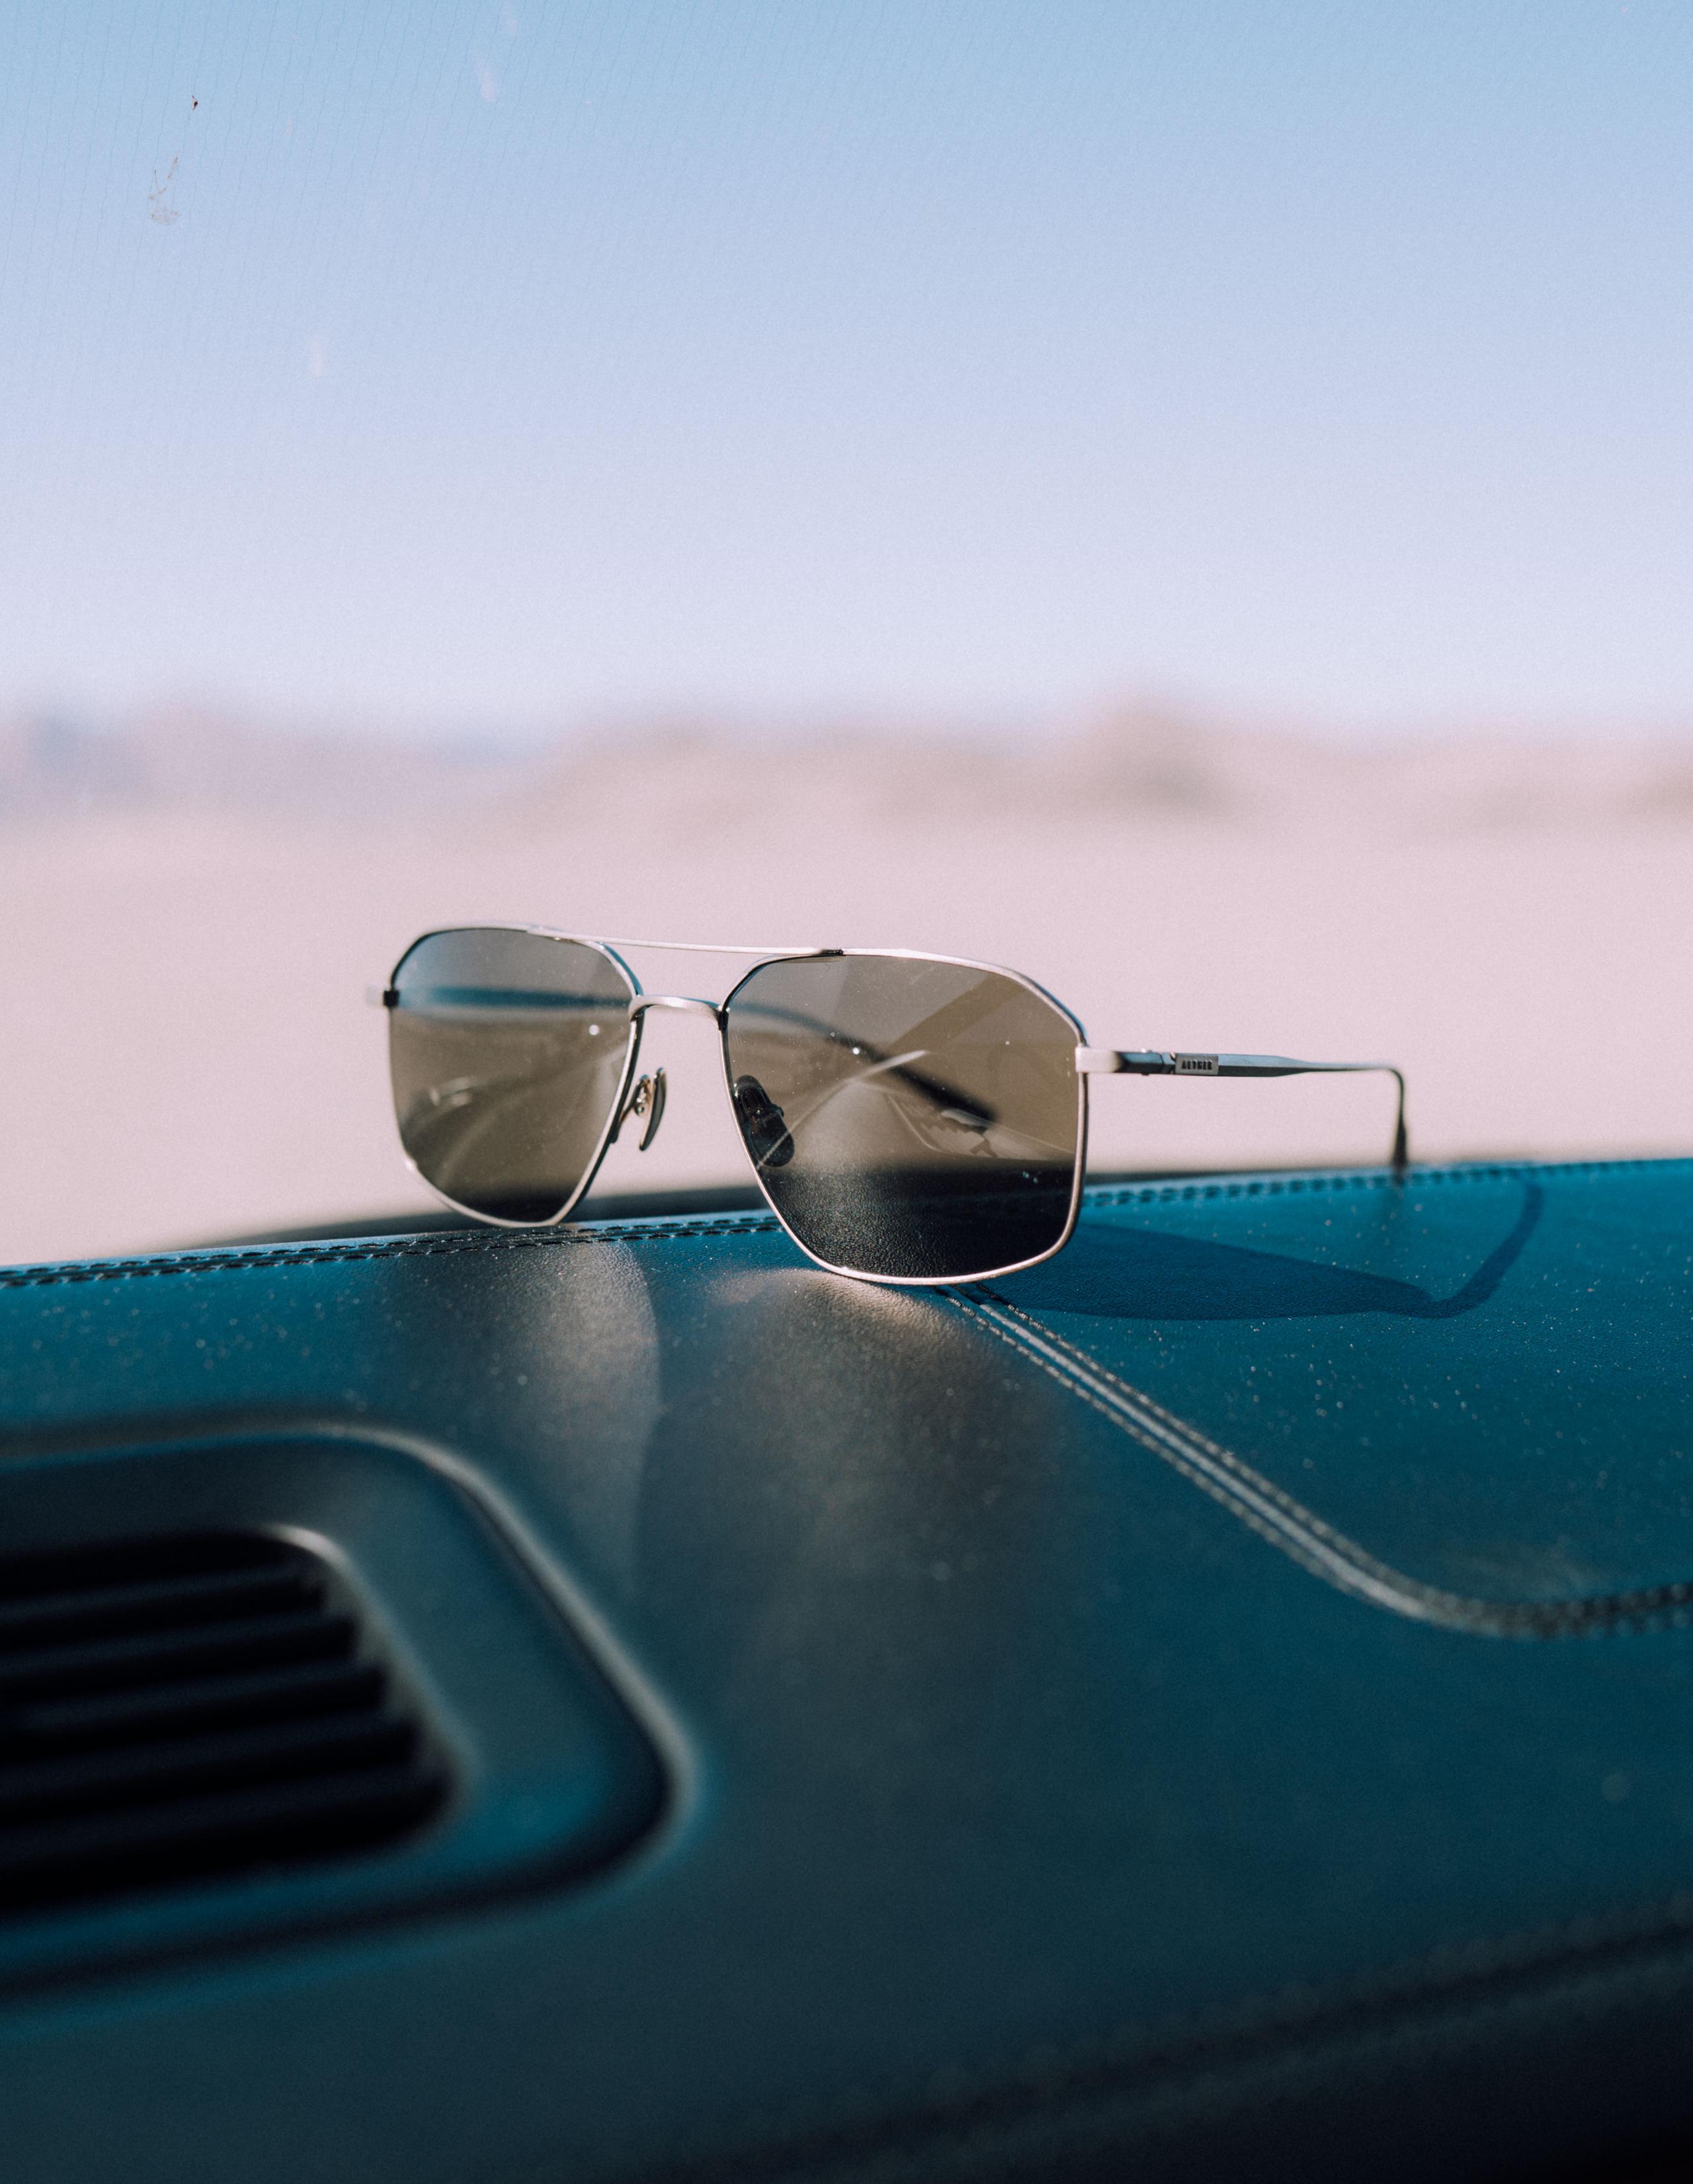 Arches sunglass sitting on dashboard of car with sand dunes in the background